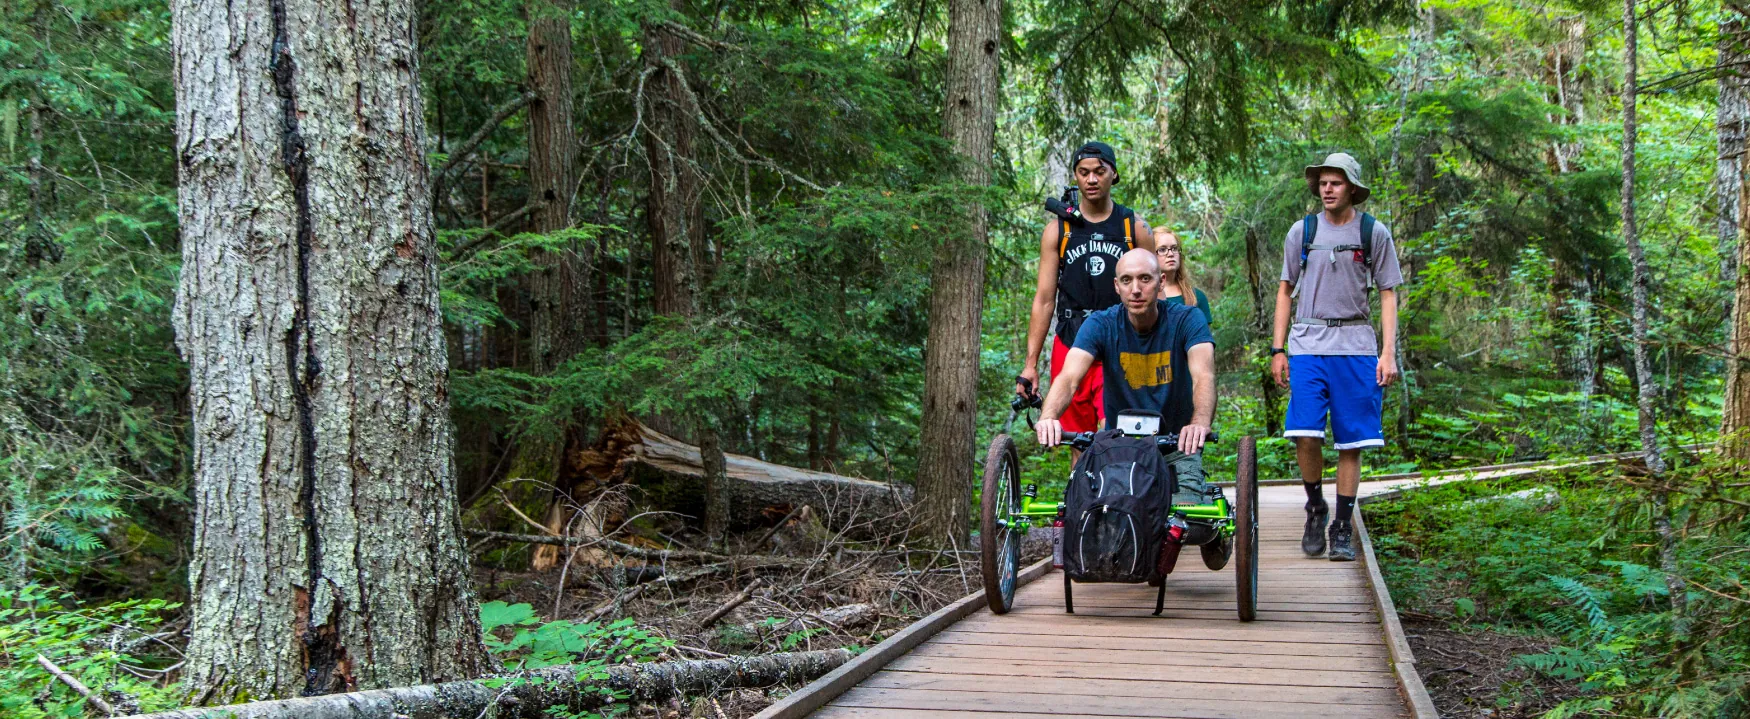 A person in a wheelchair racer is followed by three hikers as they cross over a wooden pathway in a forest.